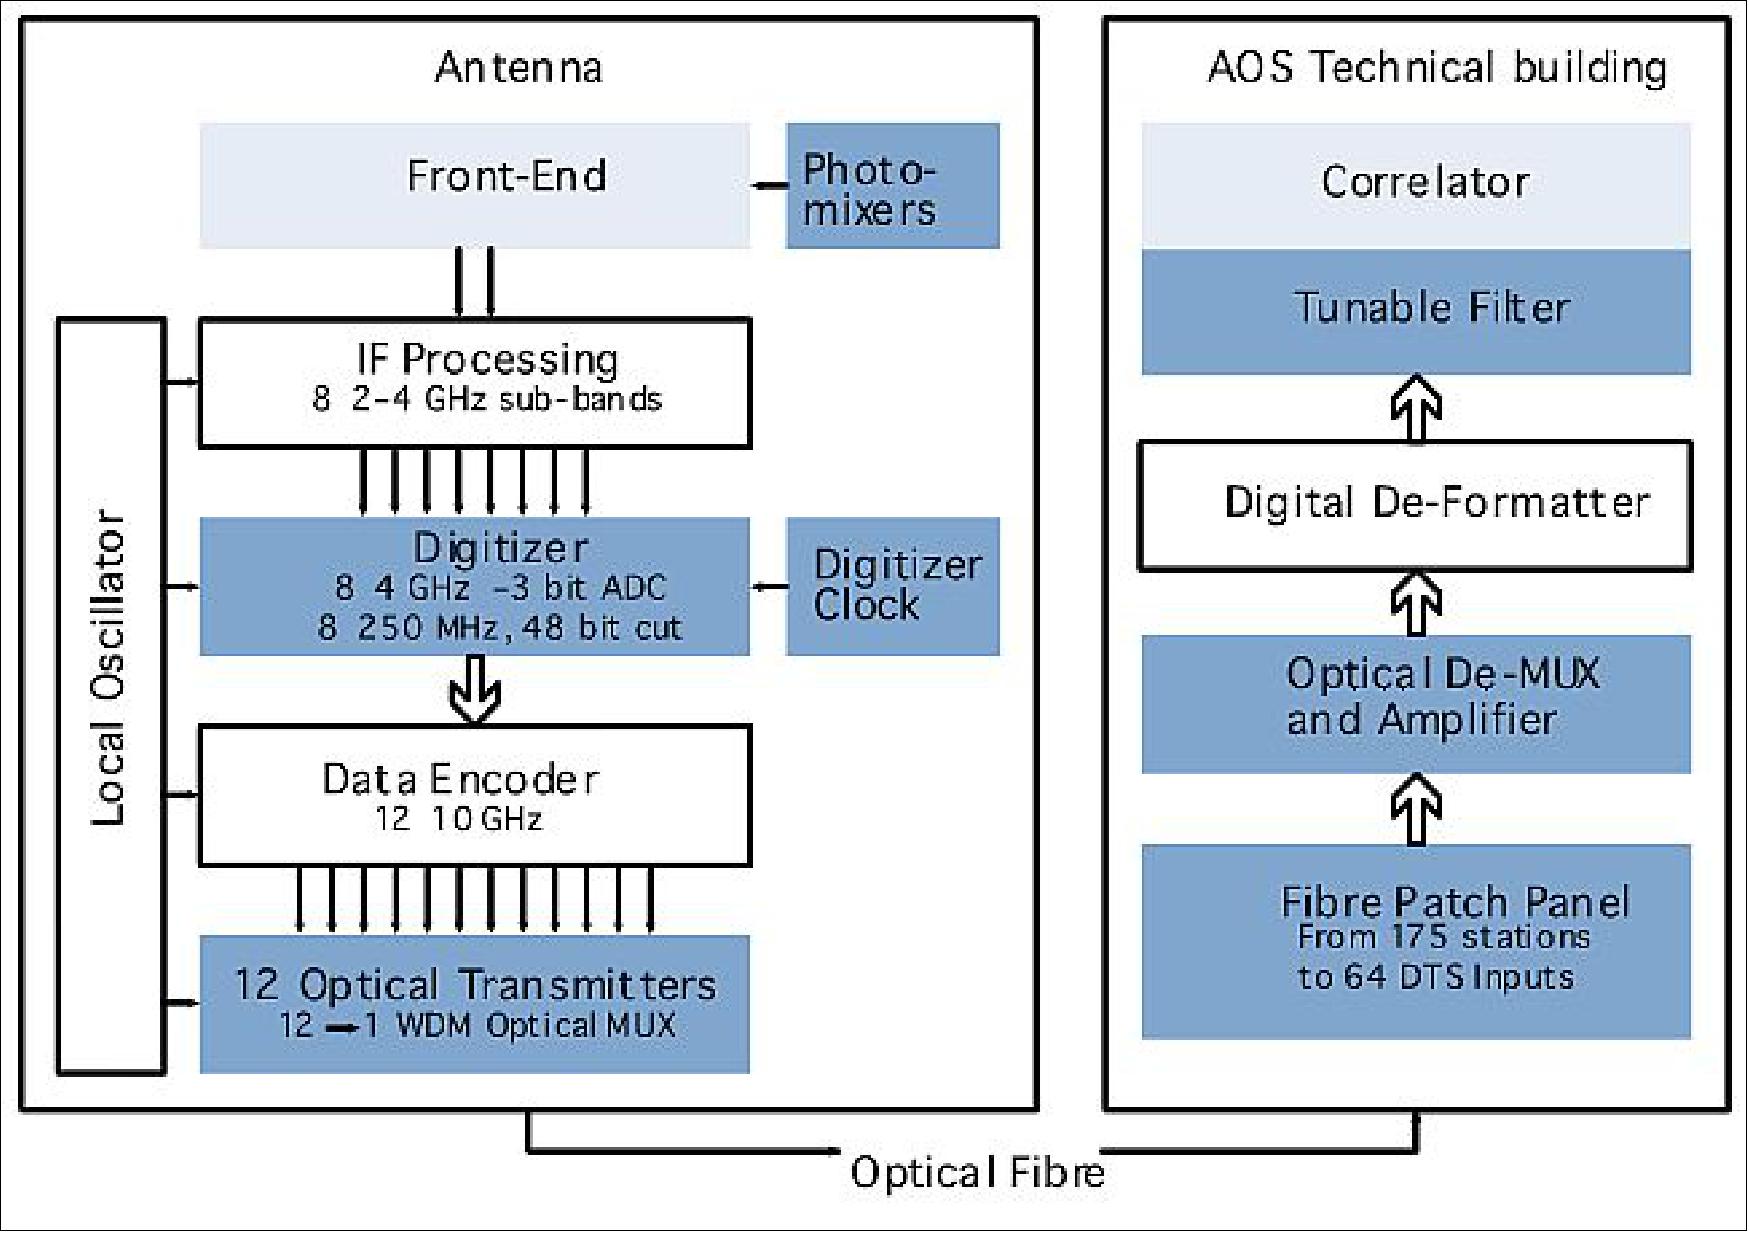 Figure 13: Schematic of the ALMA signal processing and data transfer from the Front End to the Correlator (image credit: ALMA partnership)